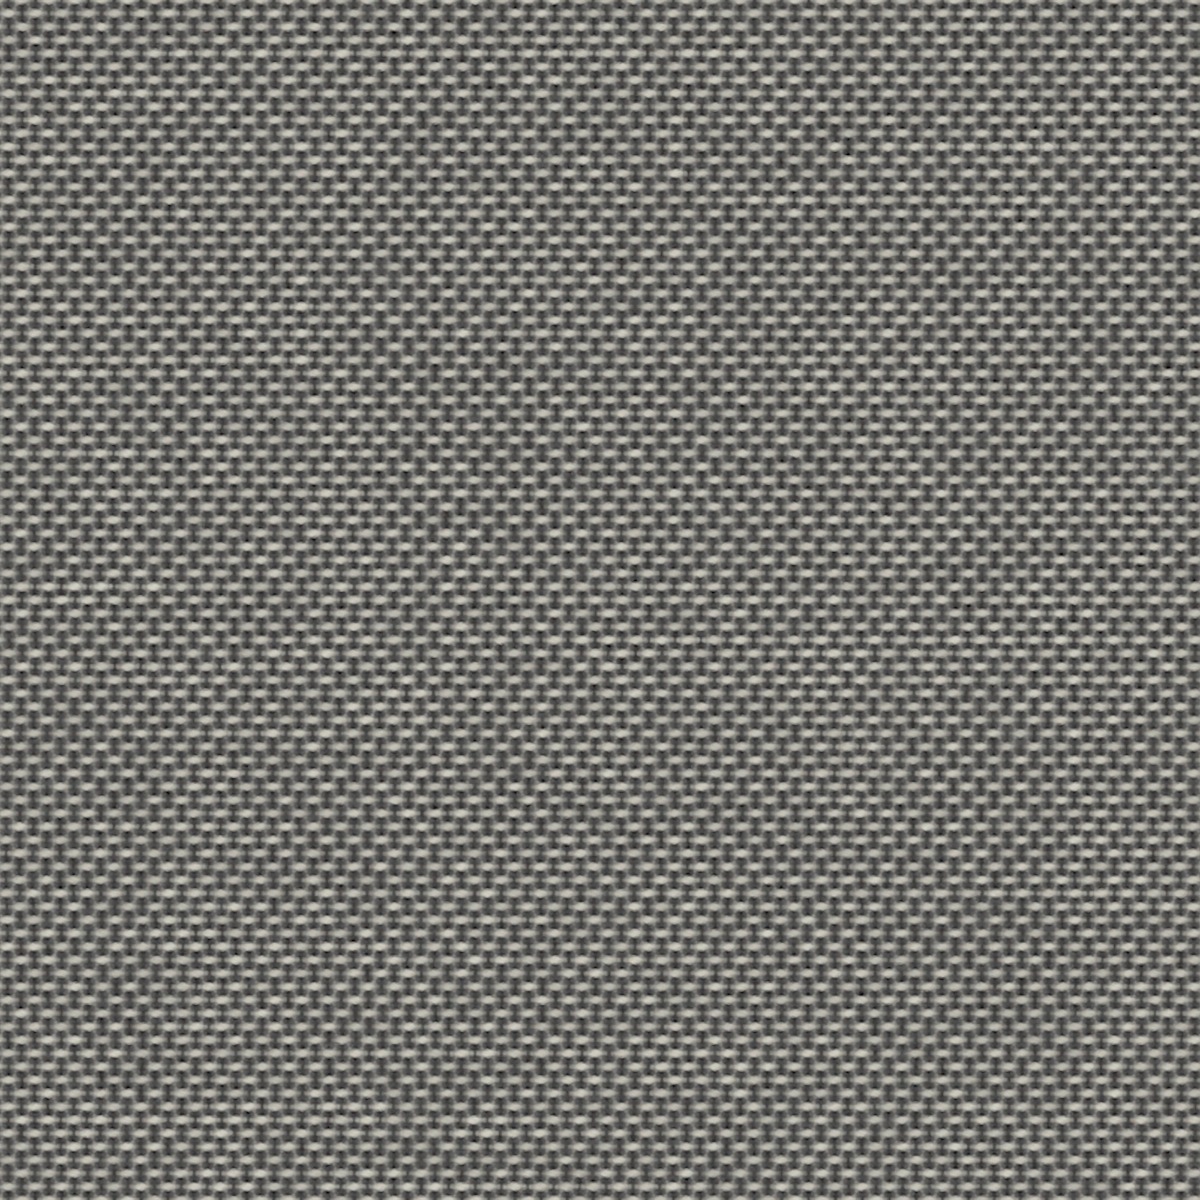 A seamless fabric texture with plain black sheer units arranged in a None pattern